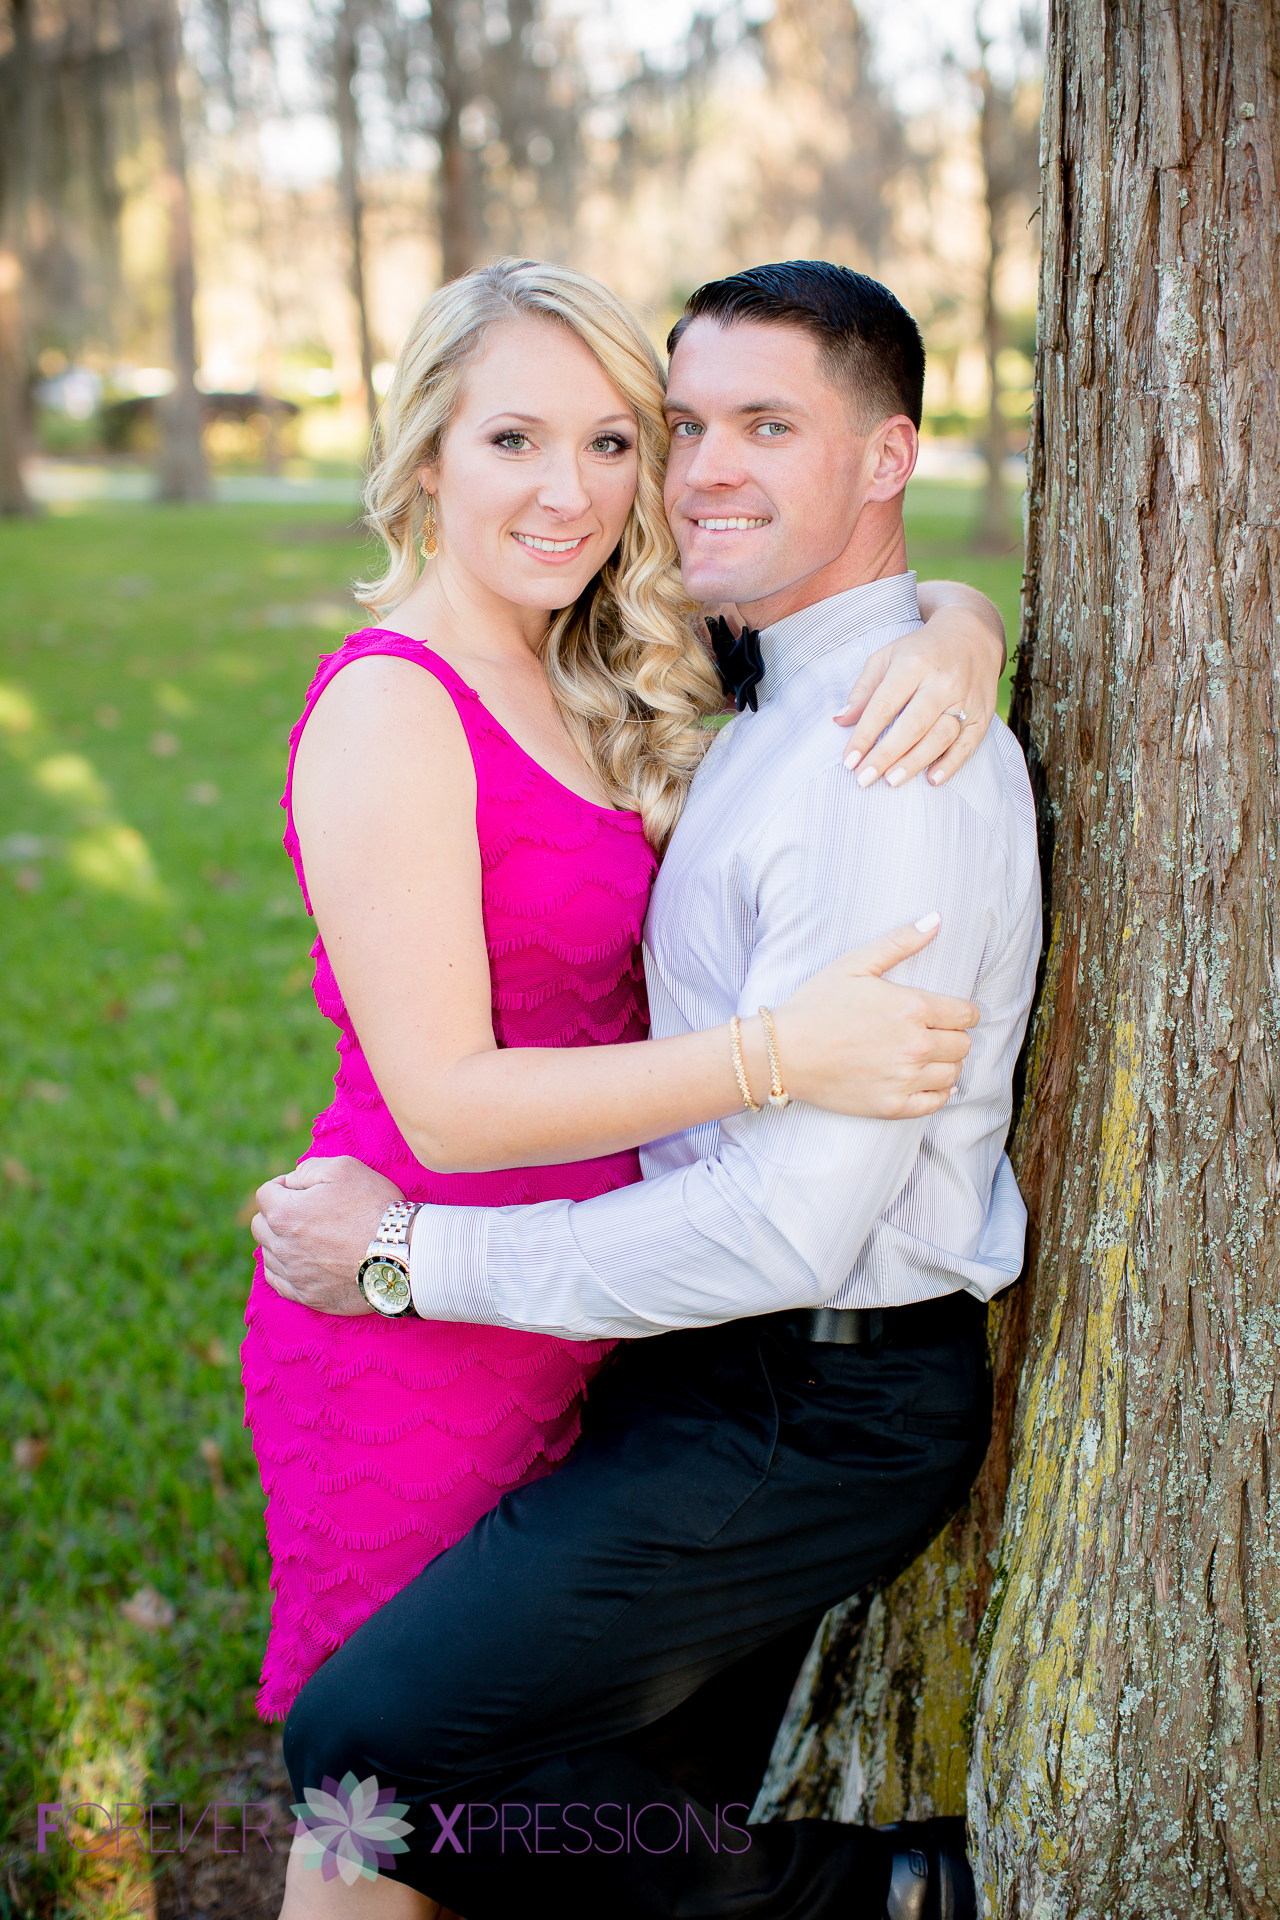 Forever_Xpressions_Engagement_Session_Orlando-1390